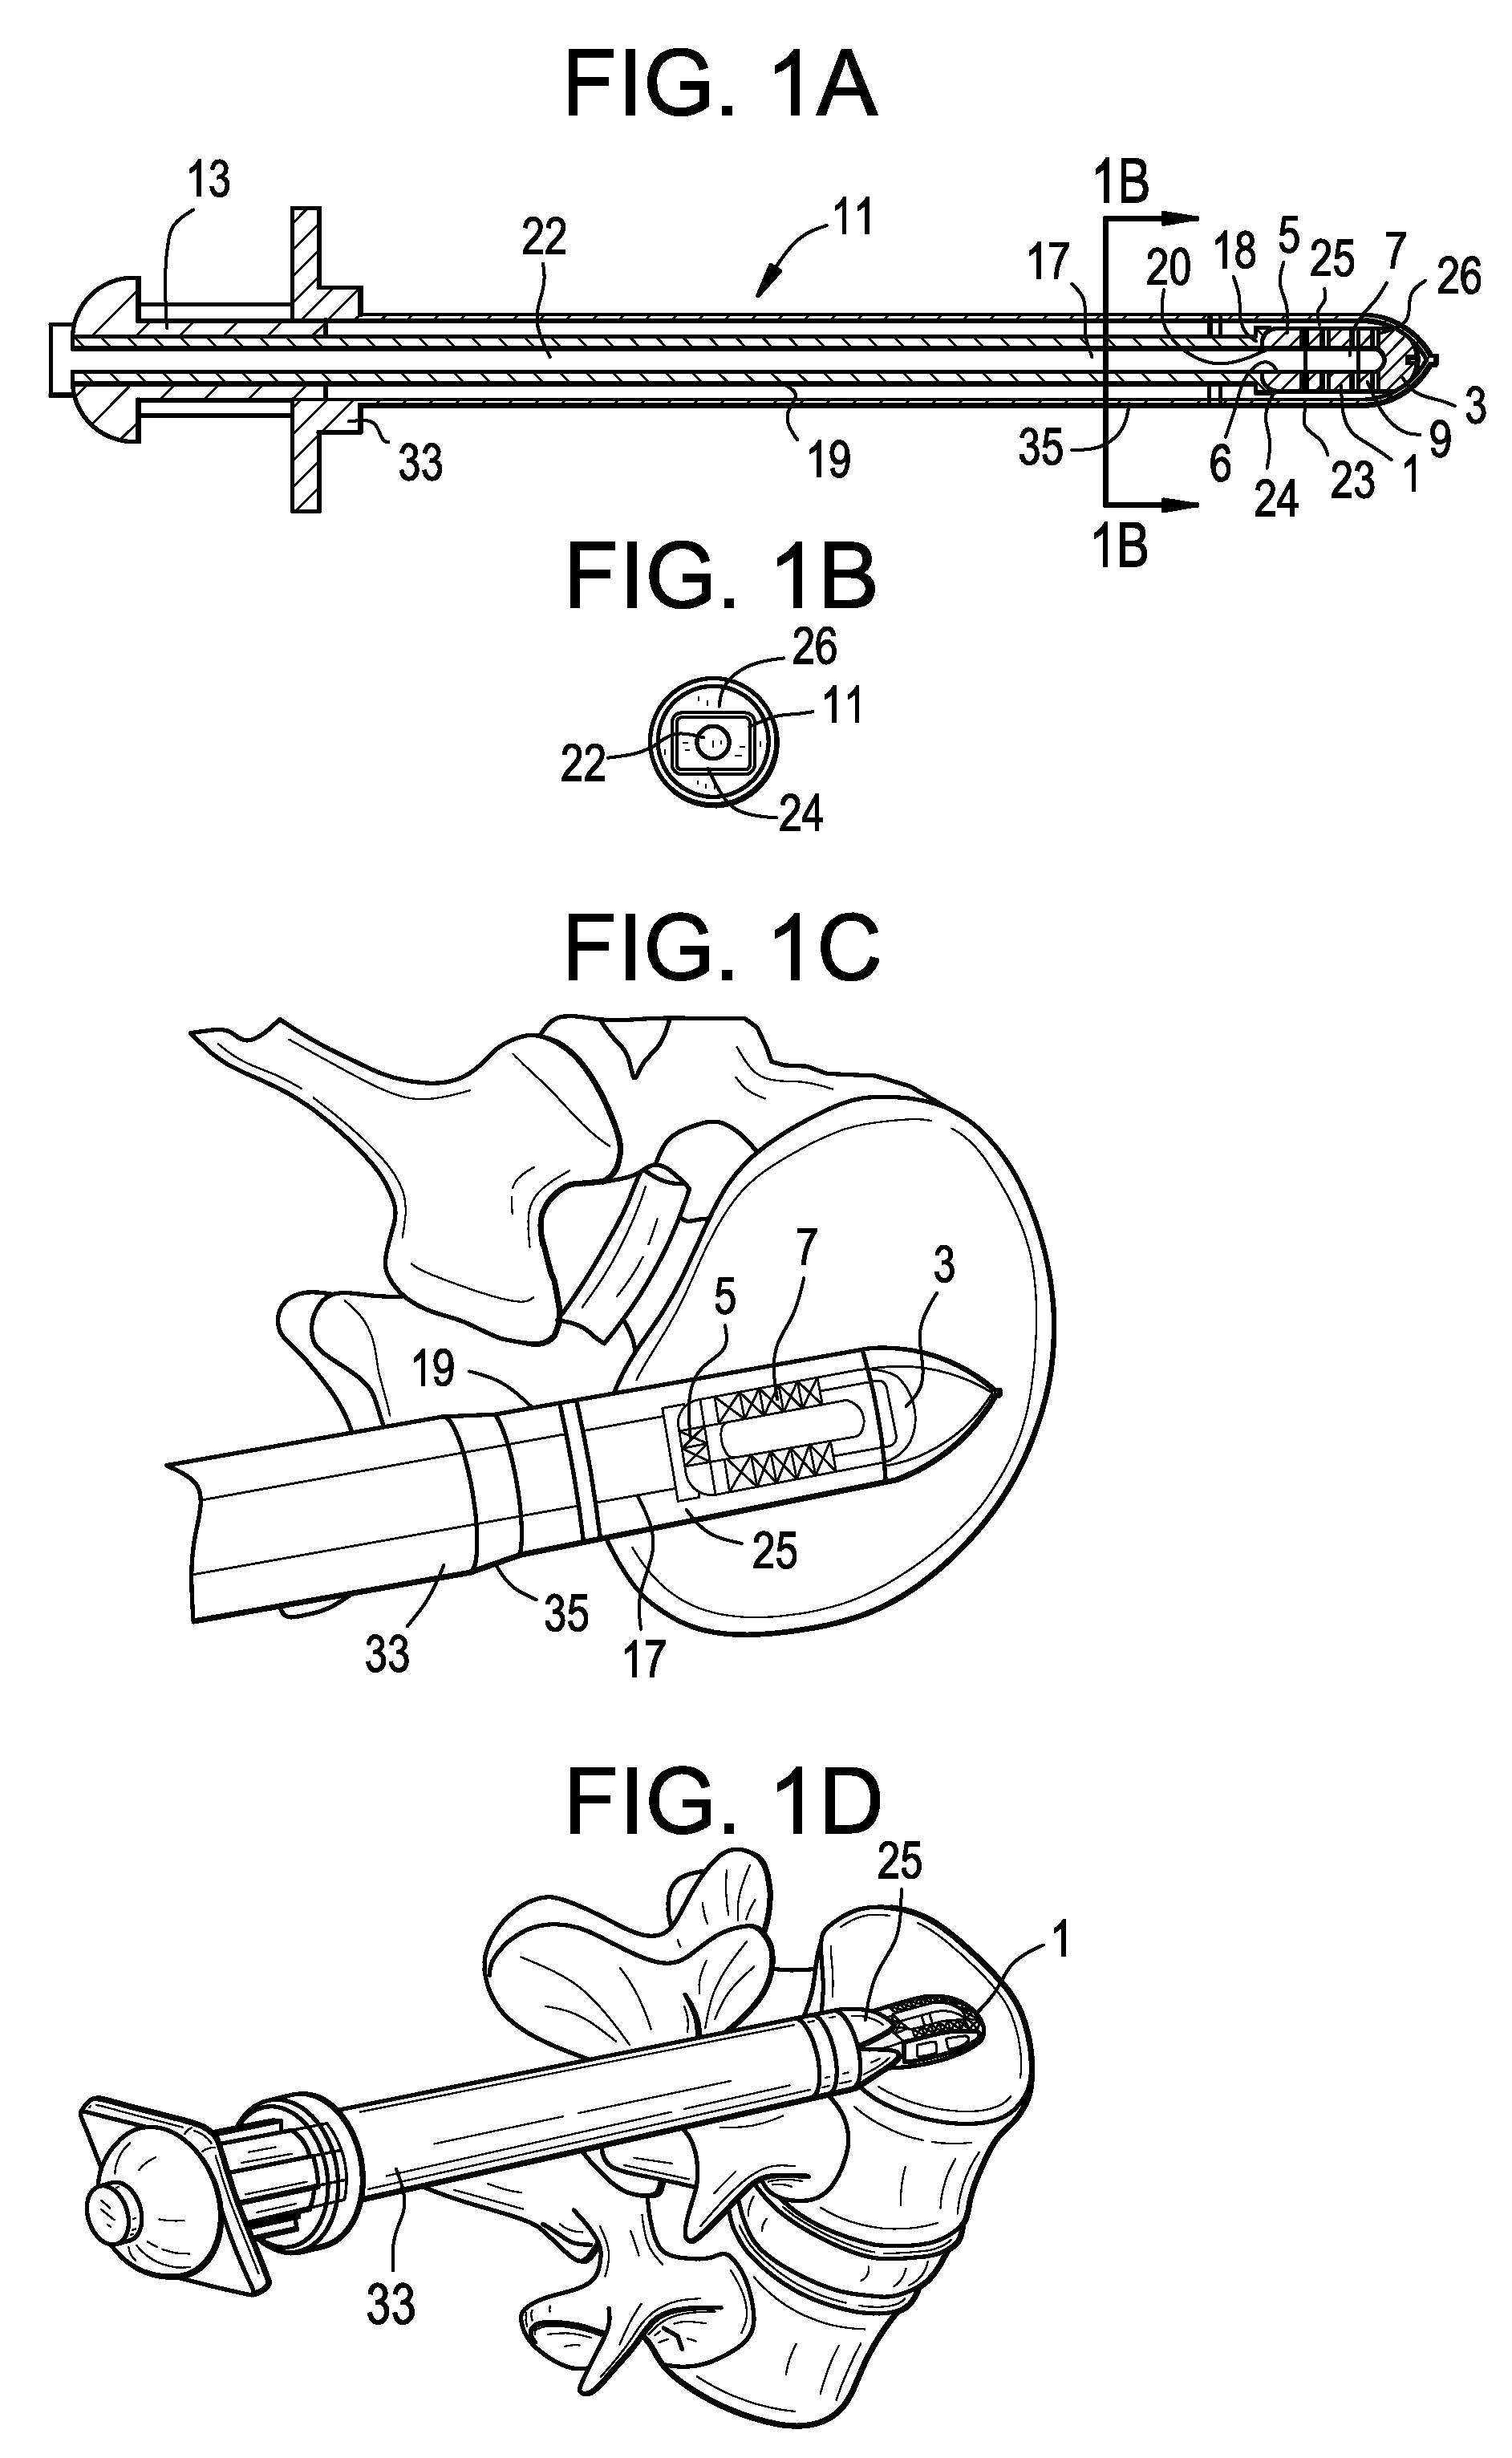 Enhanced cage insertion device